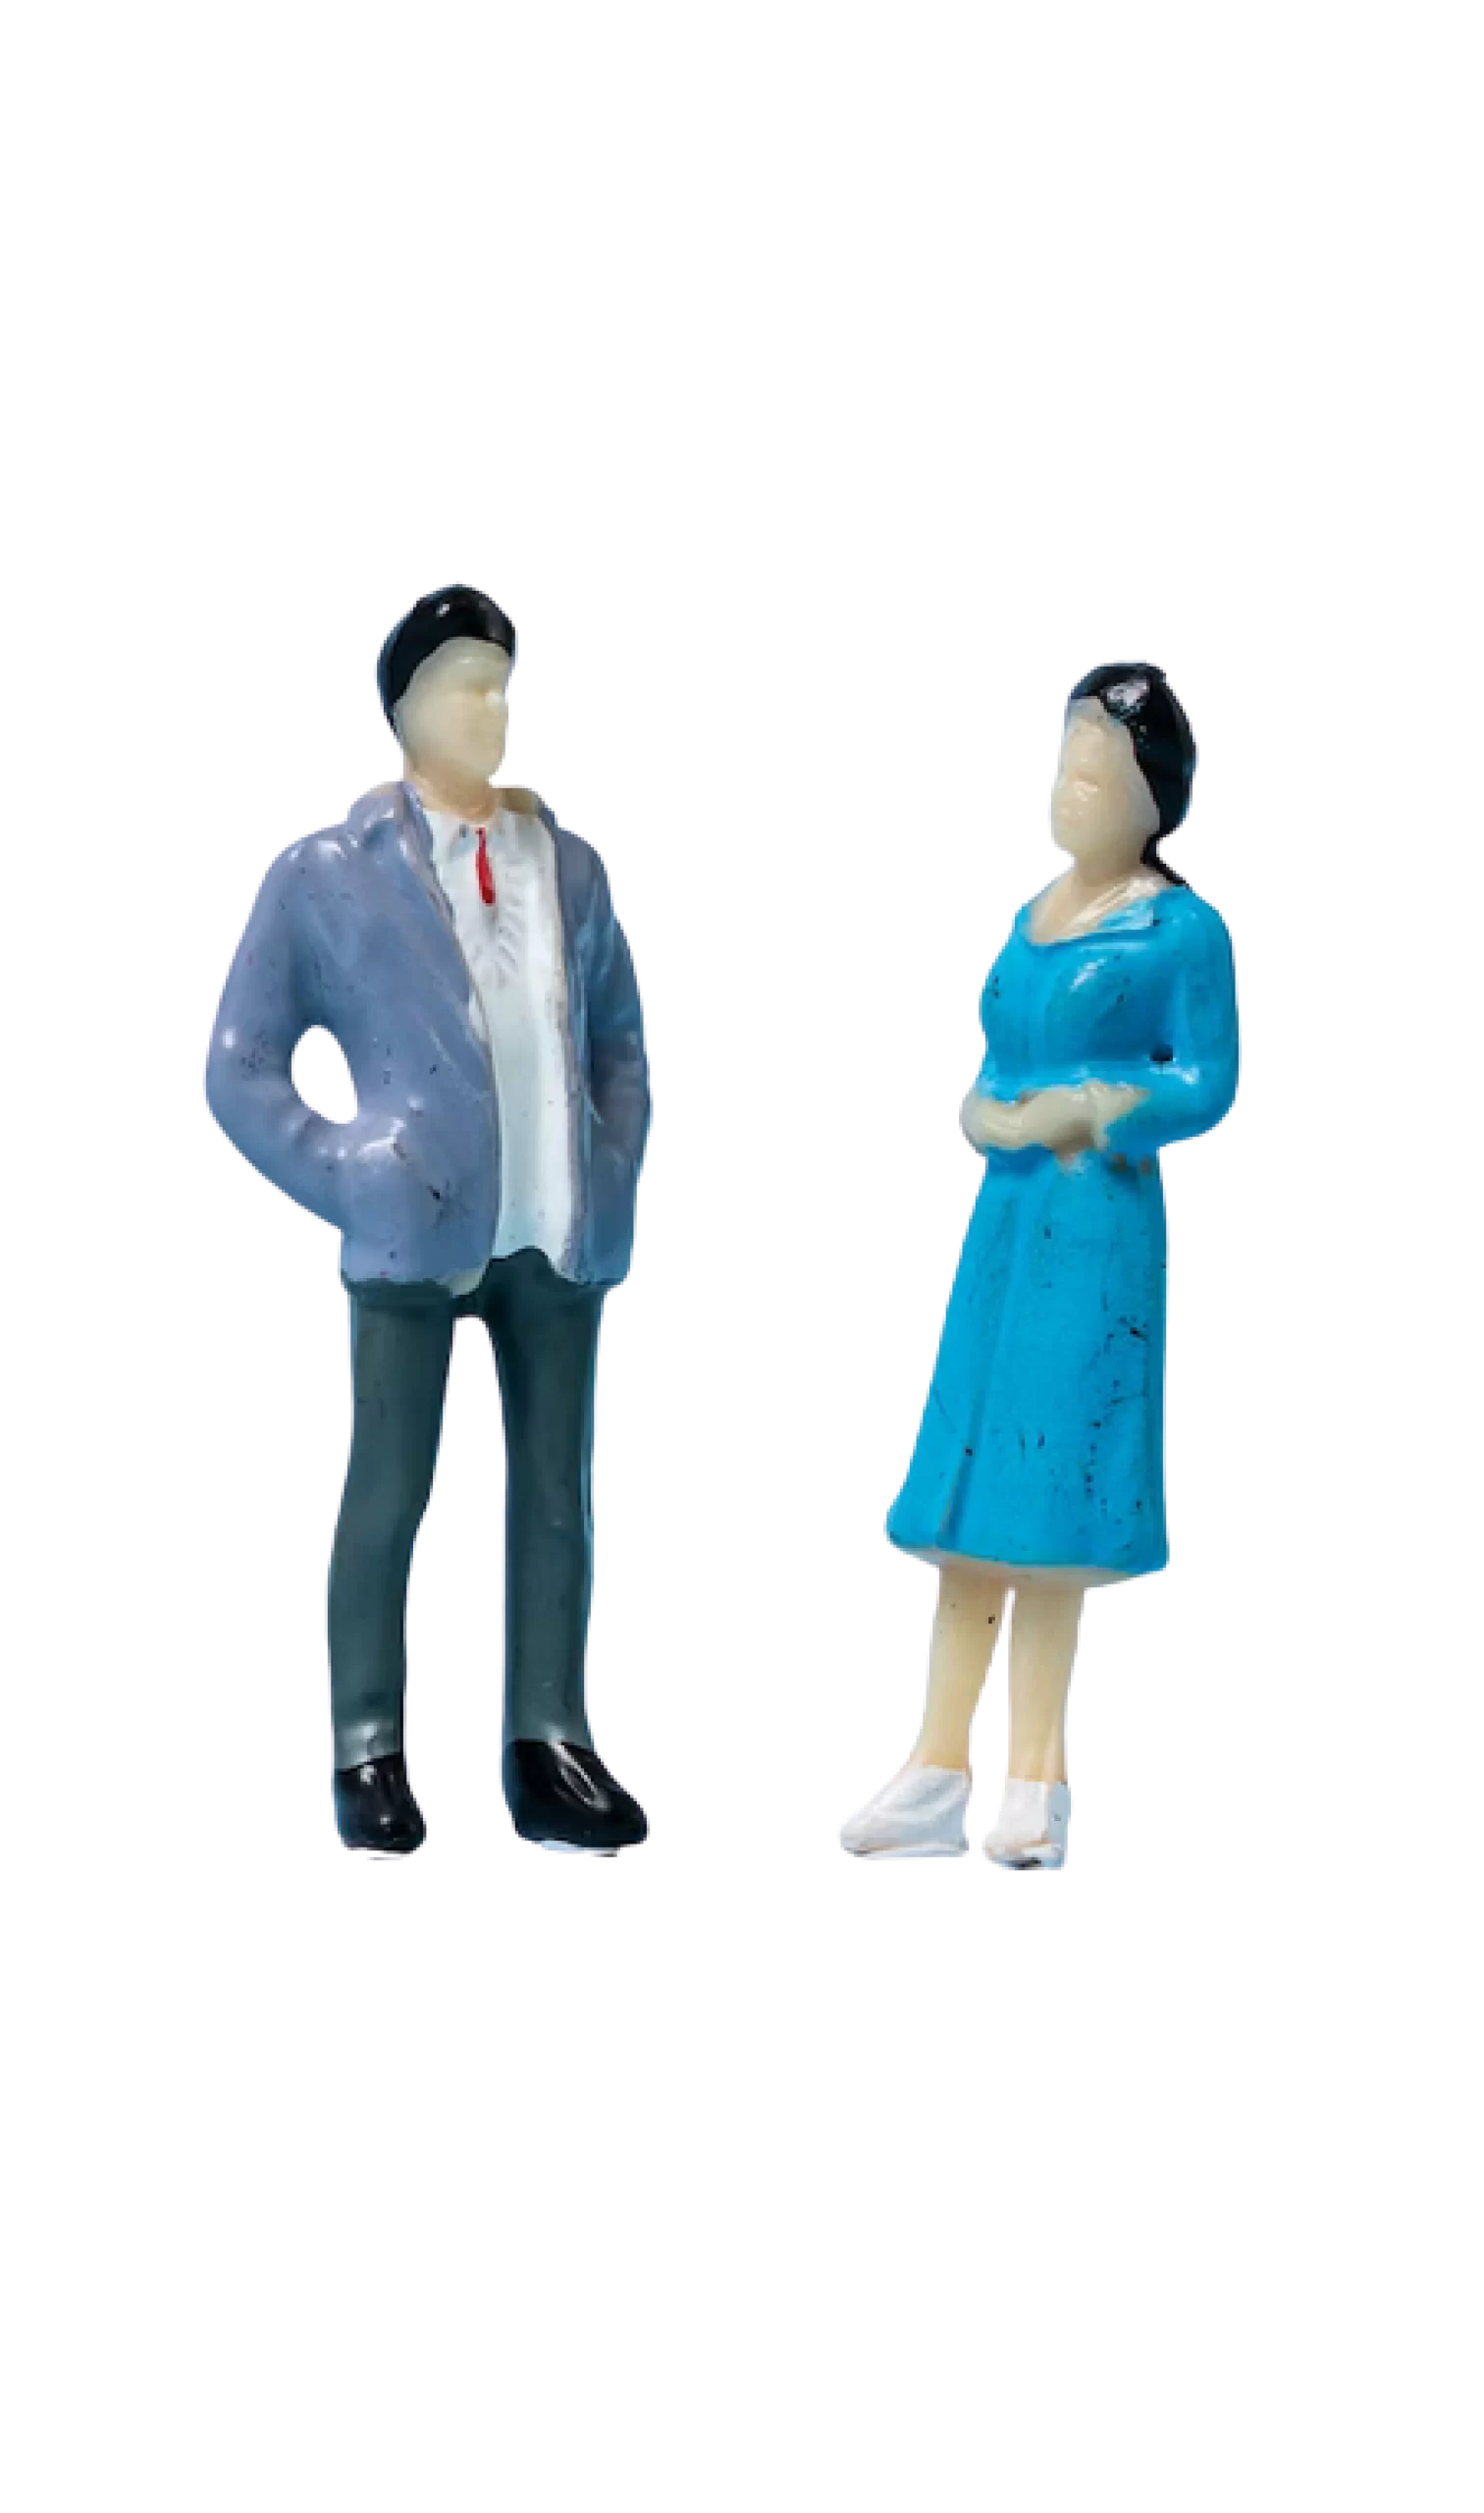 Two miniature figurines depicting a man and a woman in conversation, set against a black background.